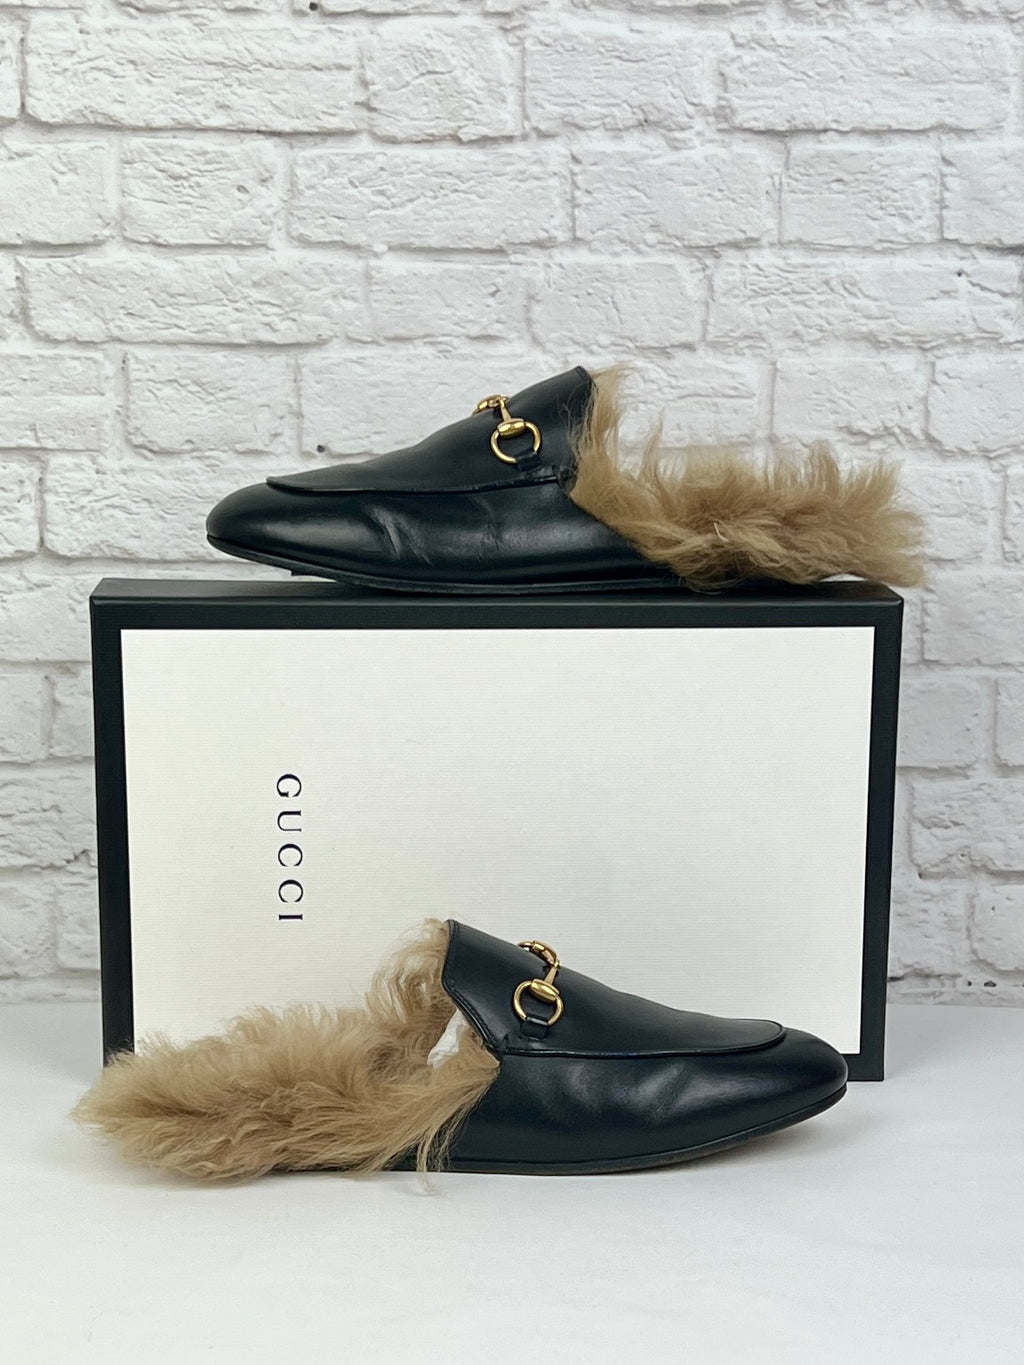 Gucci Princetown Fur Lined Slippers, Size 38/US 7.5